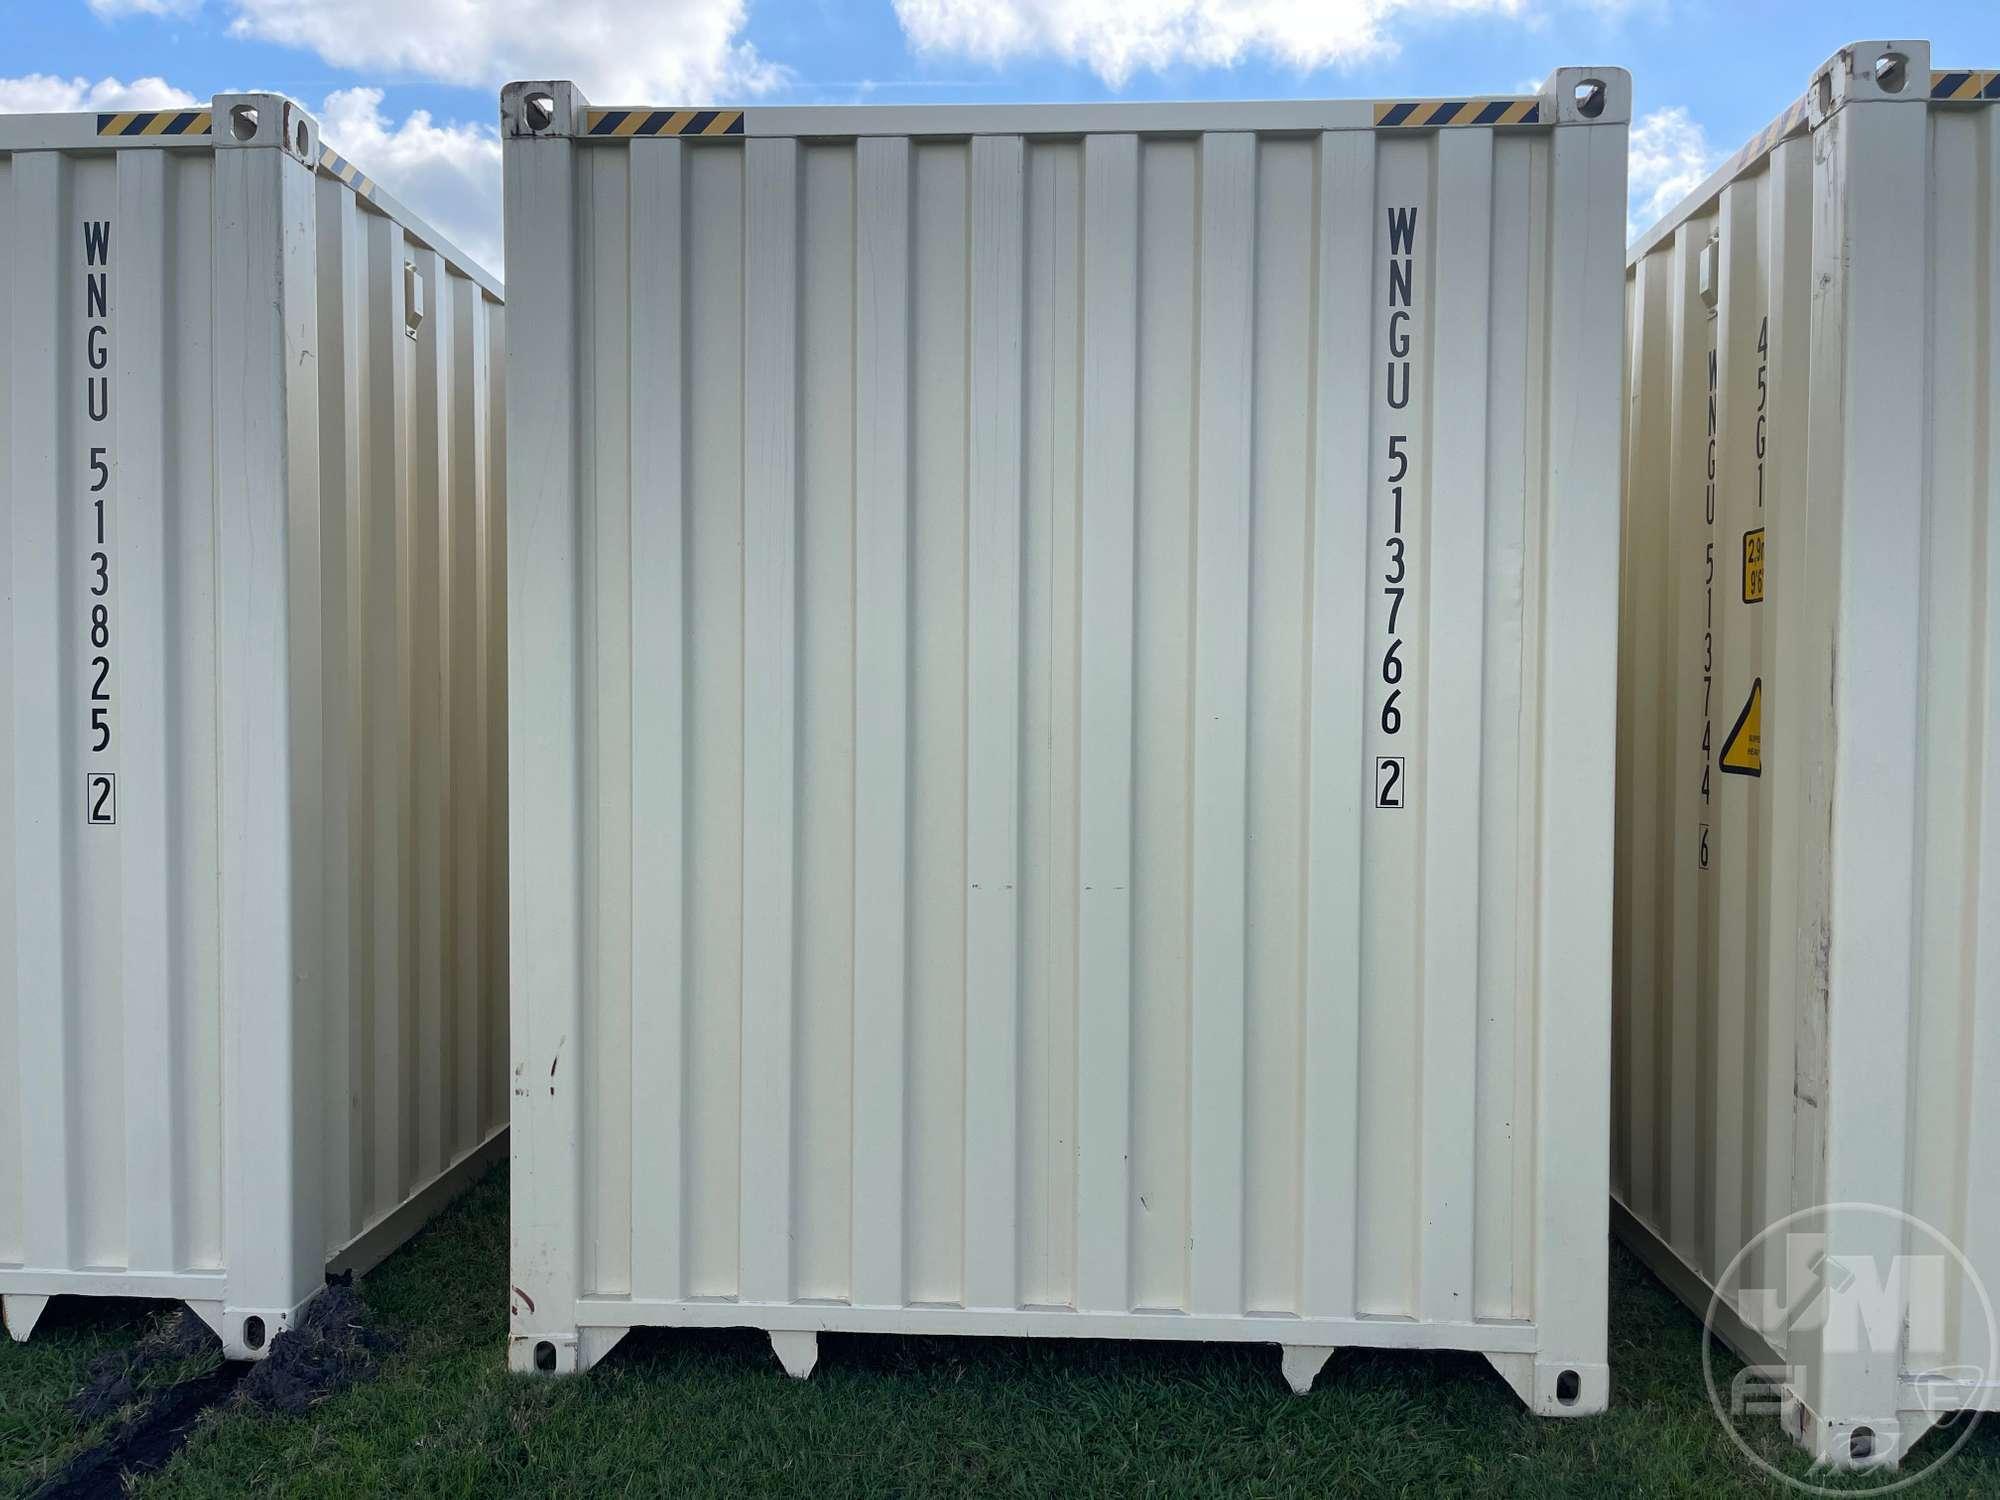 2023 WNG CONTAINER 40' CONTAINER SN: WNGU5137662